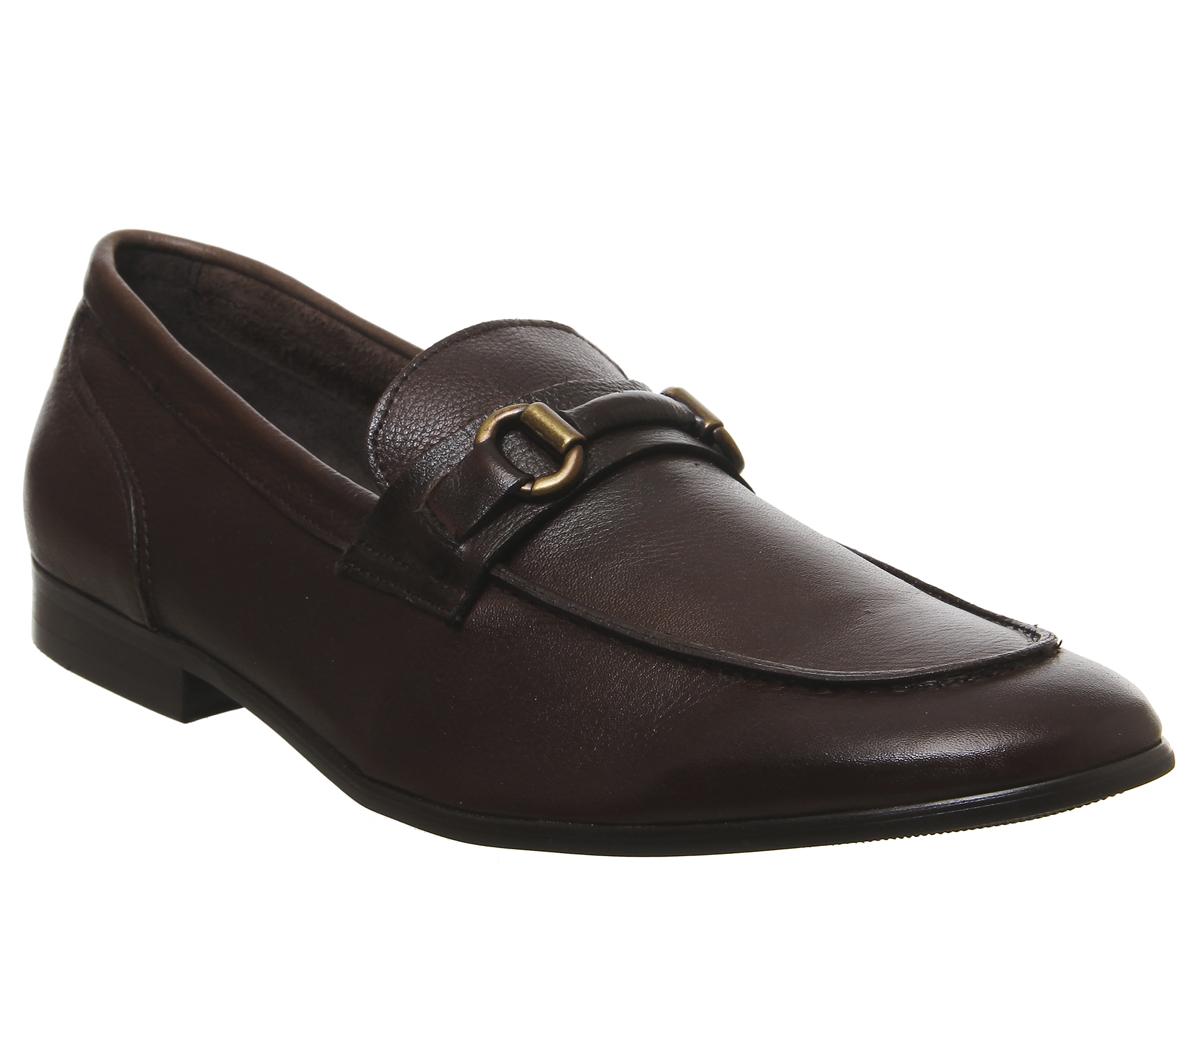 OFFICELeopard Wrapped Snaffle LoafersChoc Leather